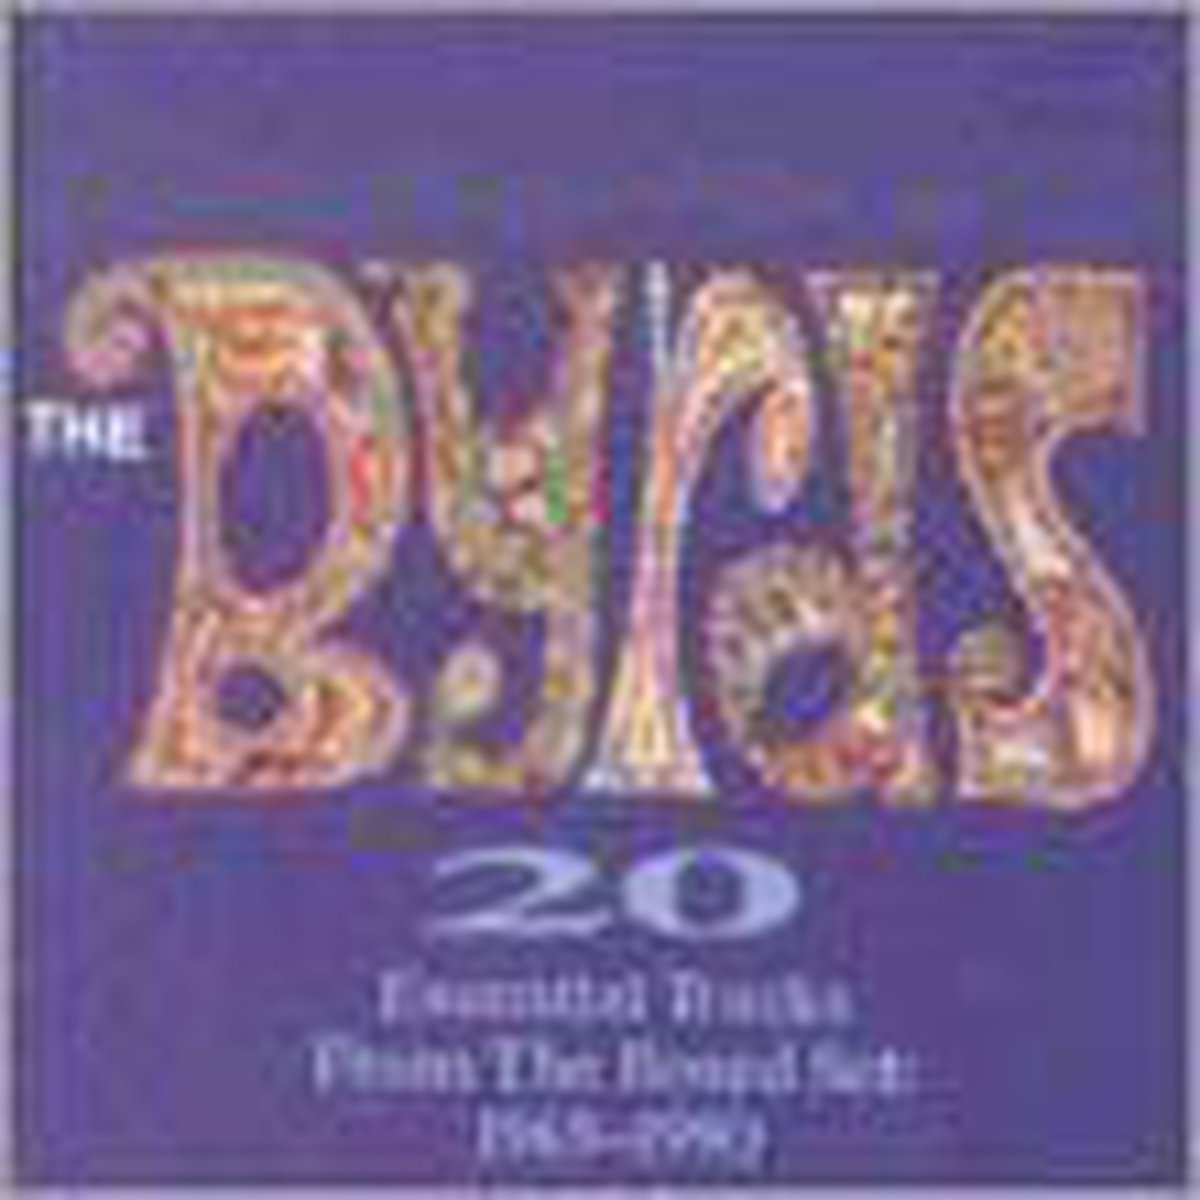 20 Essential Tracks From The Boxed Set: 1965-1990 - The Byrds